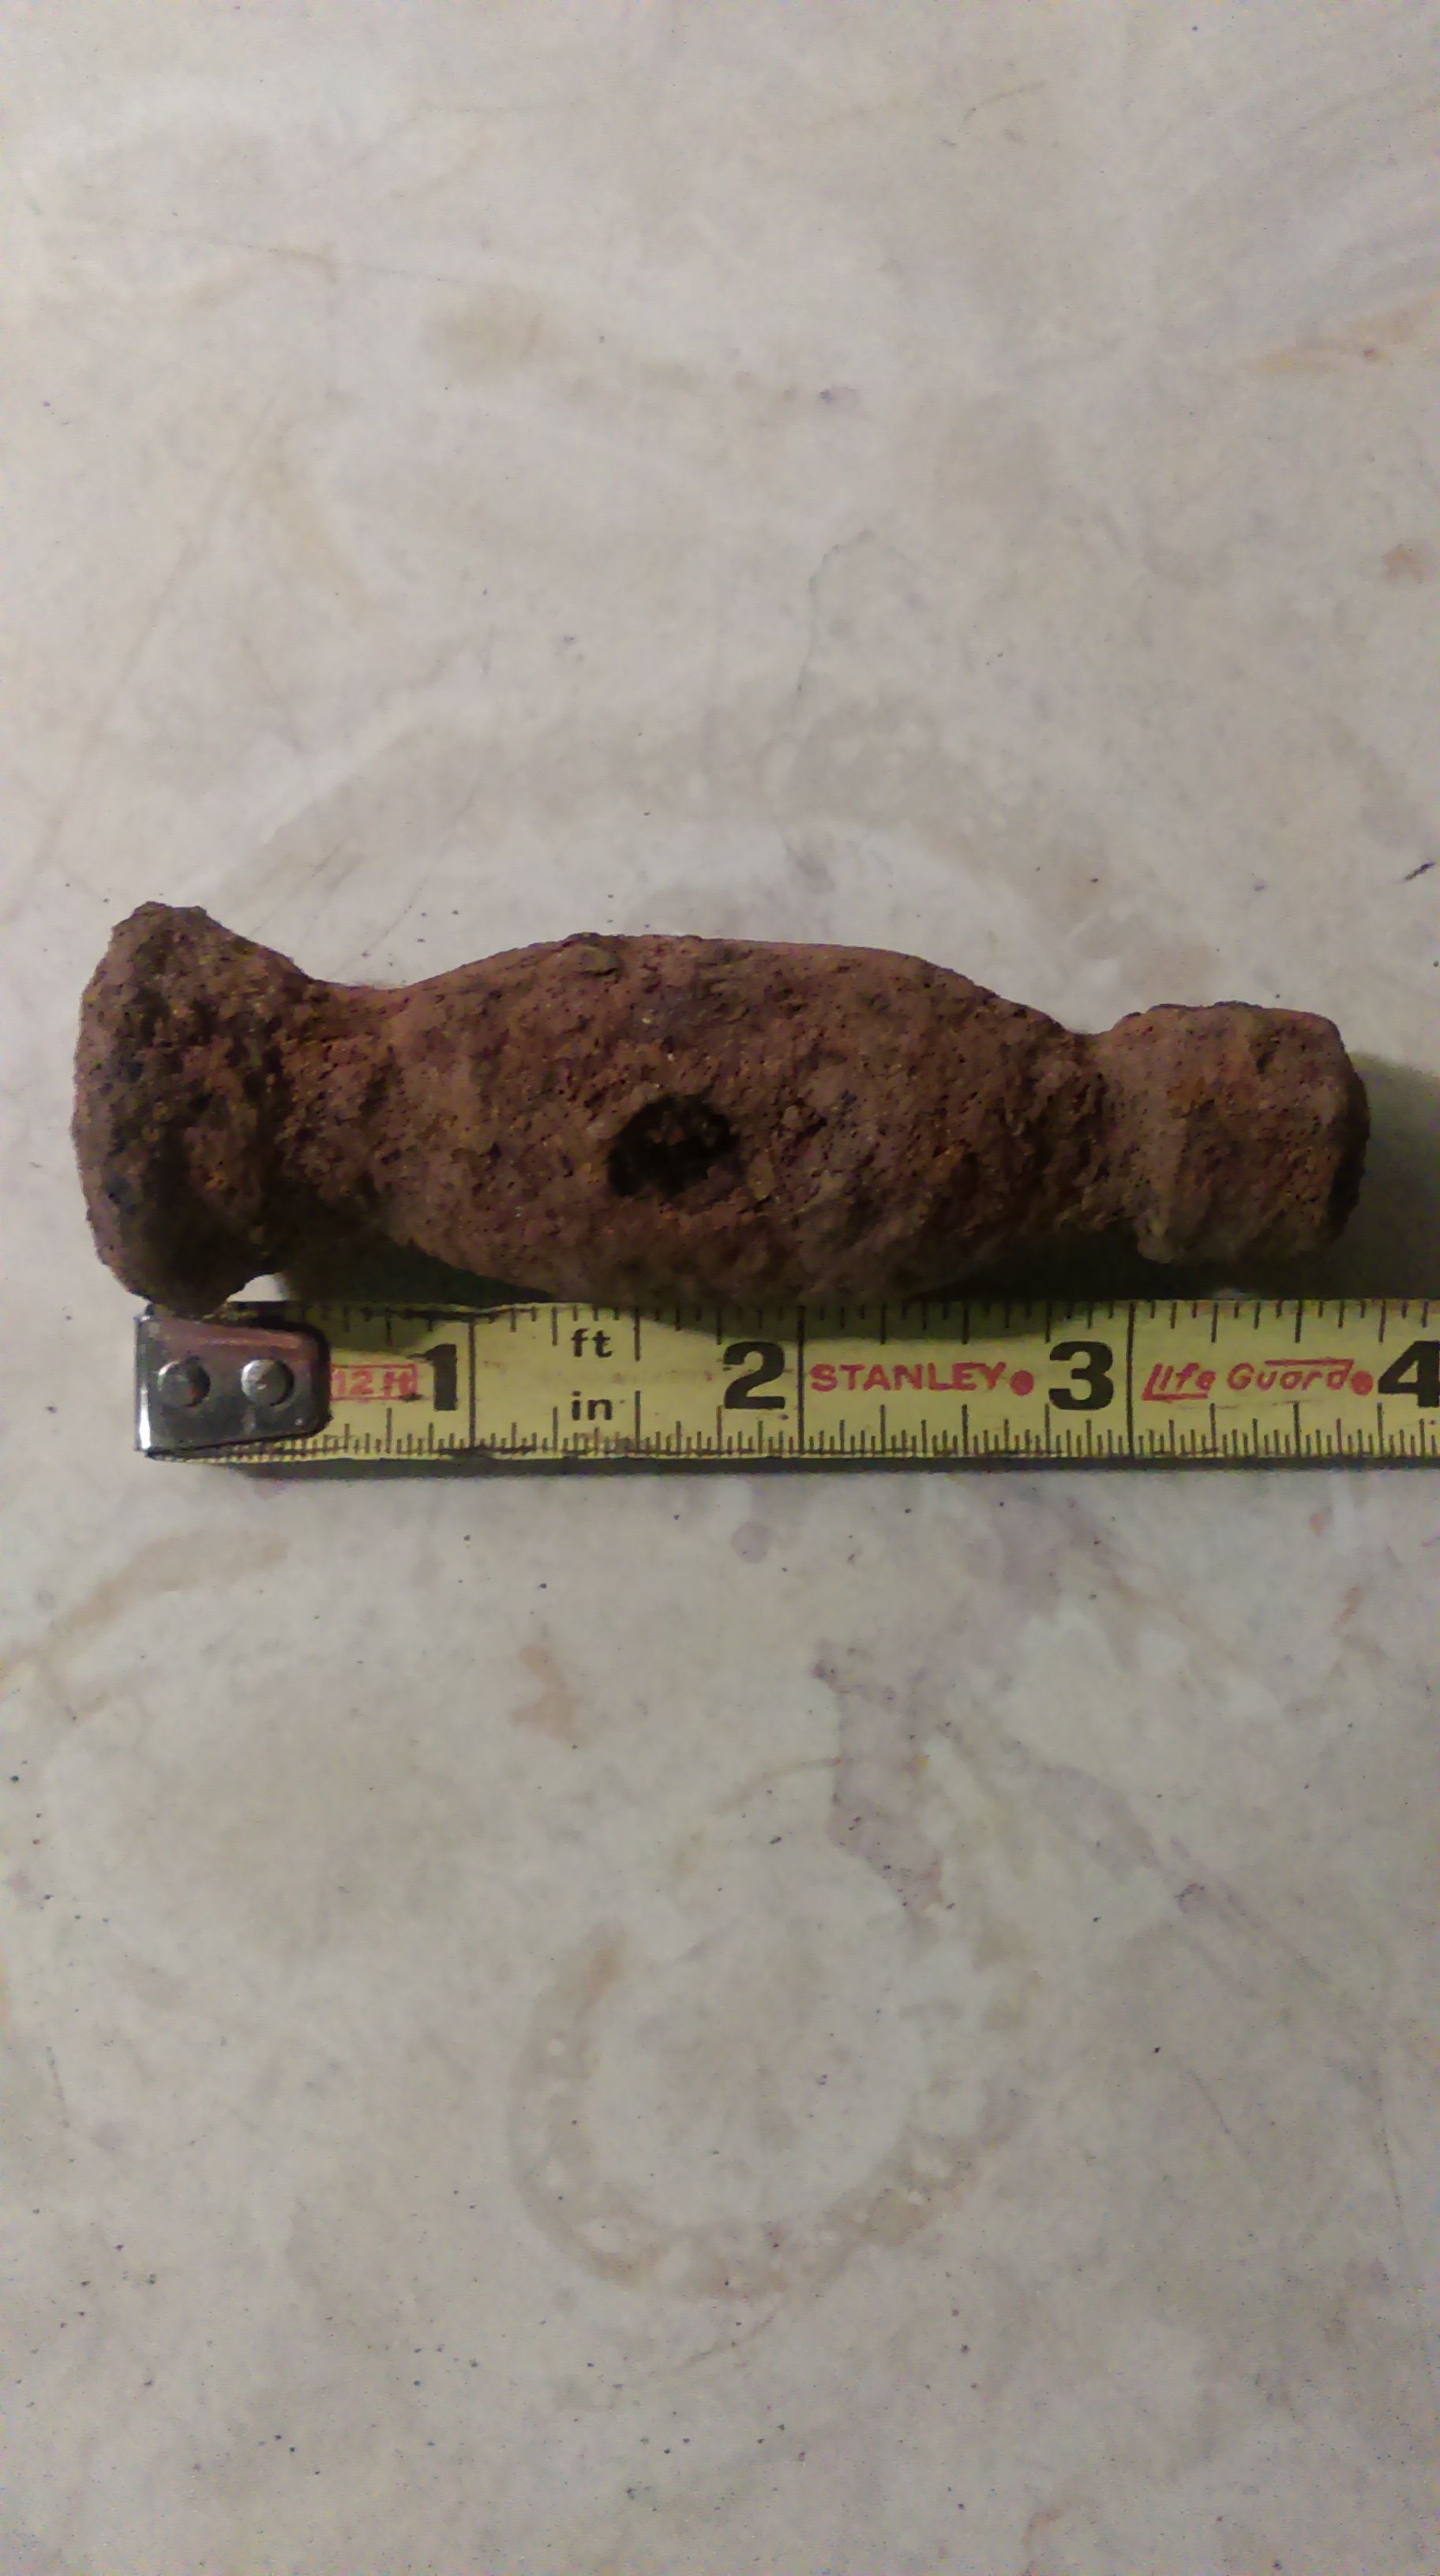 IMAG1222 probable shoe hammer found with civil war material and shoe hardware